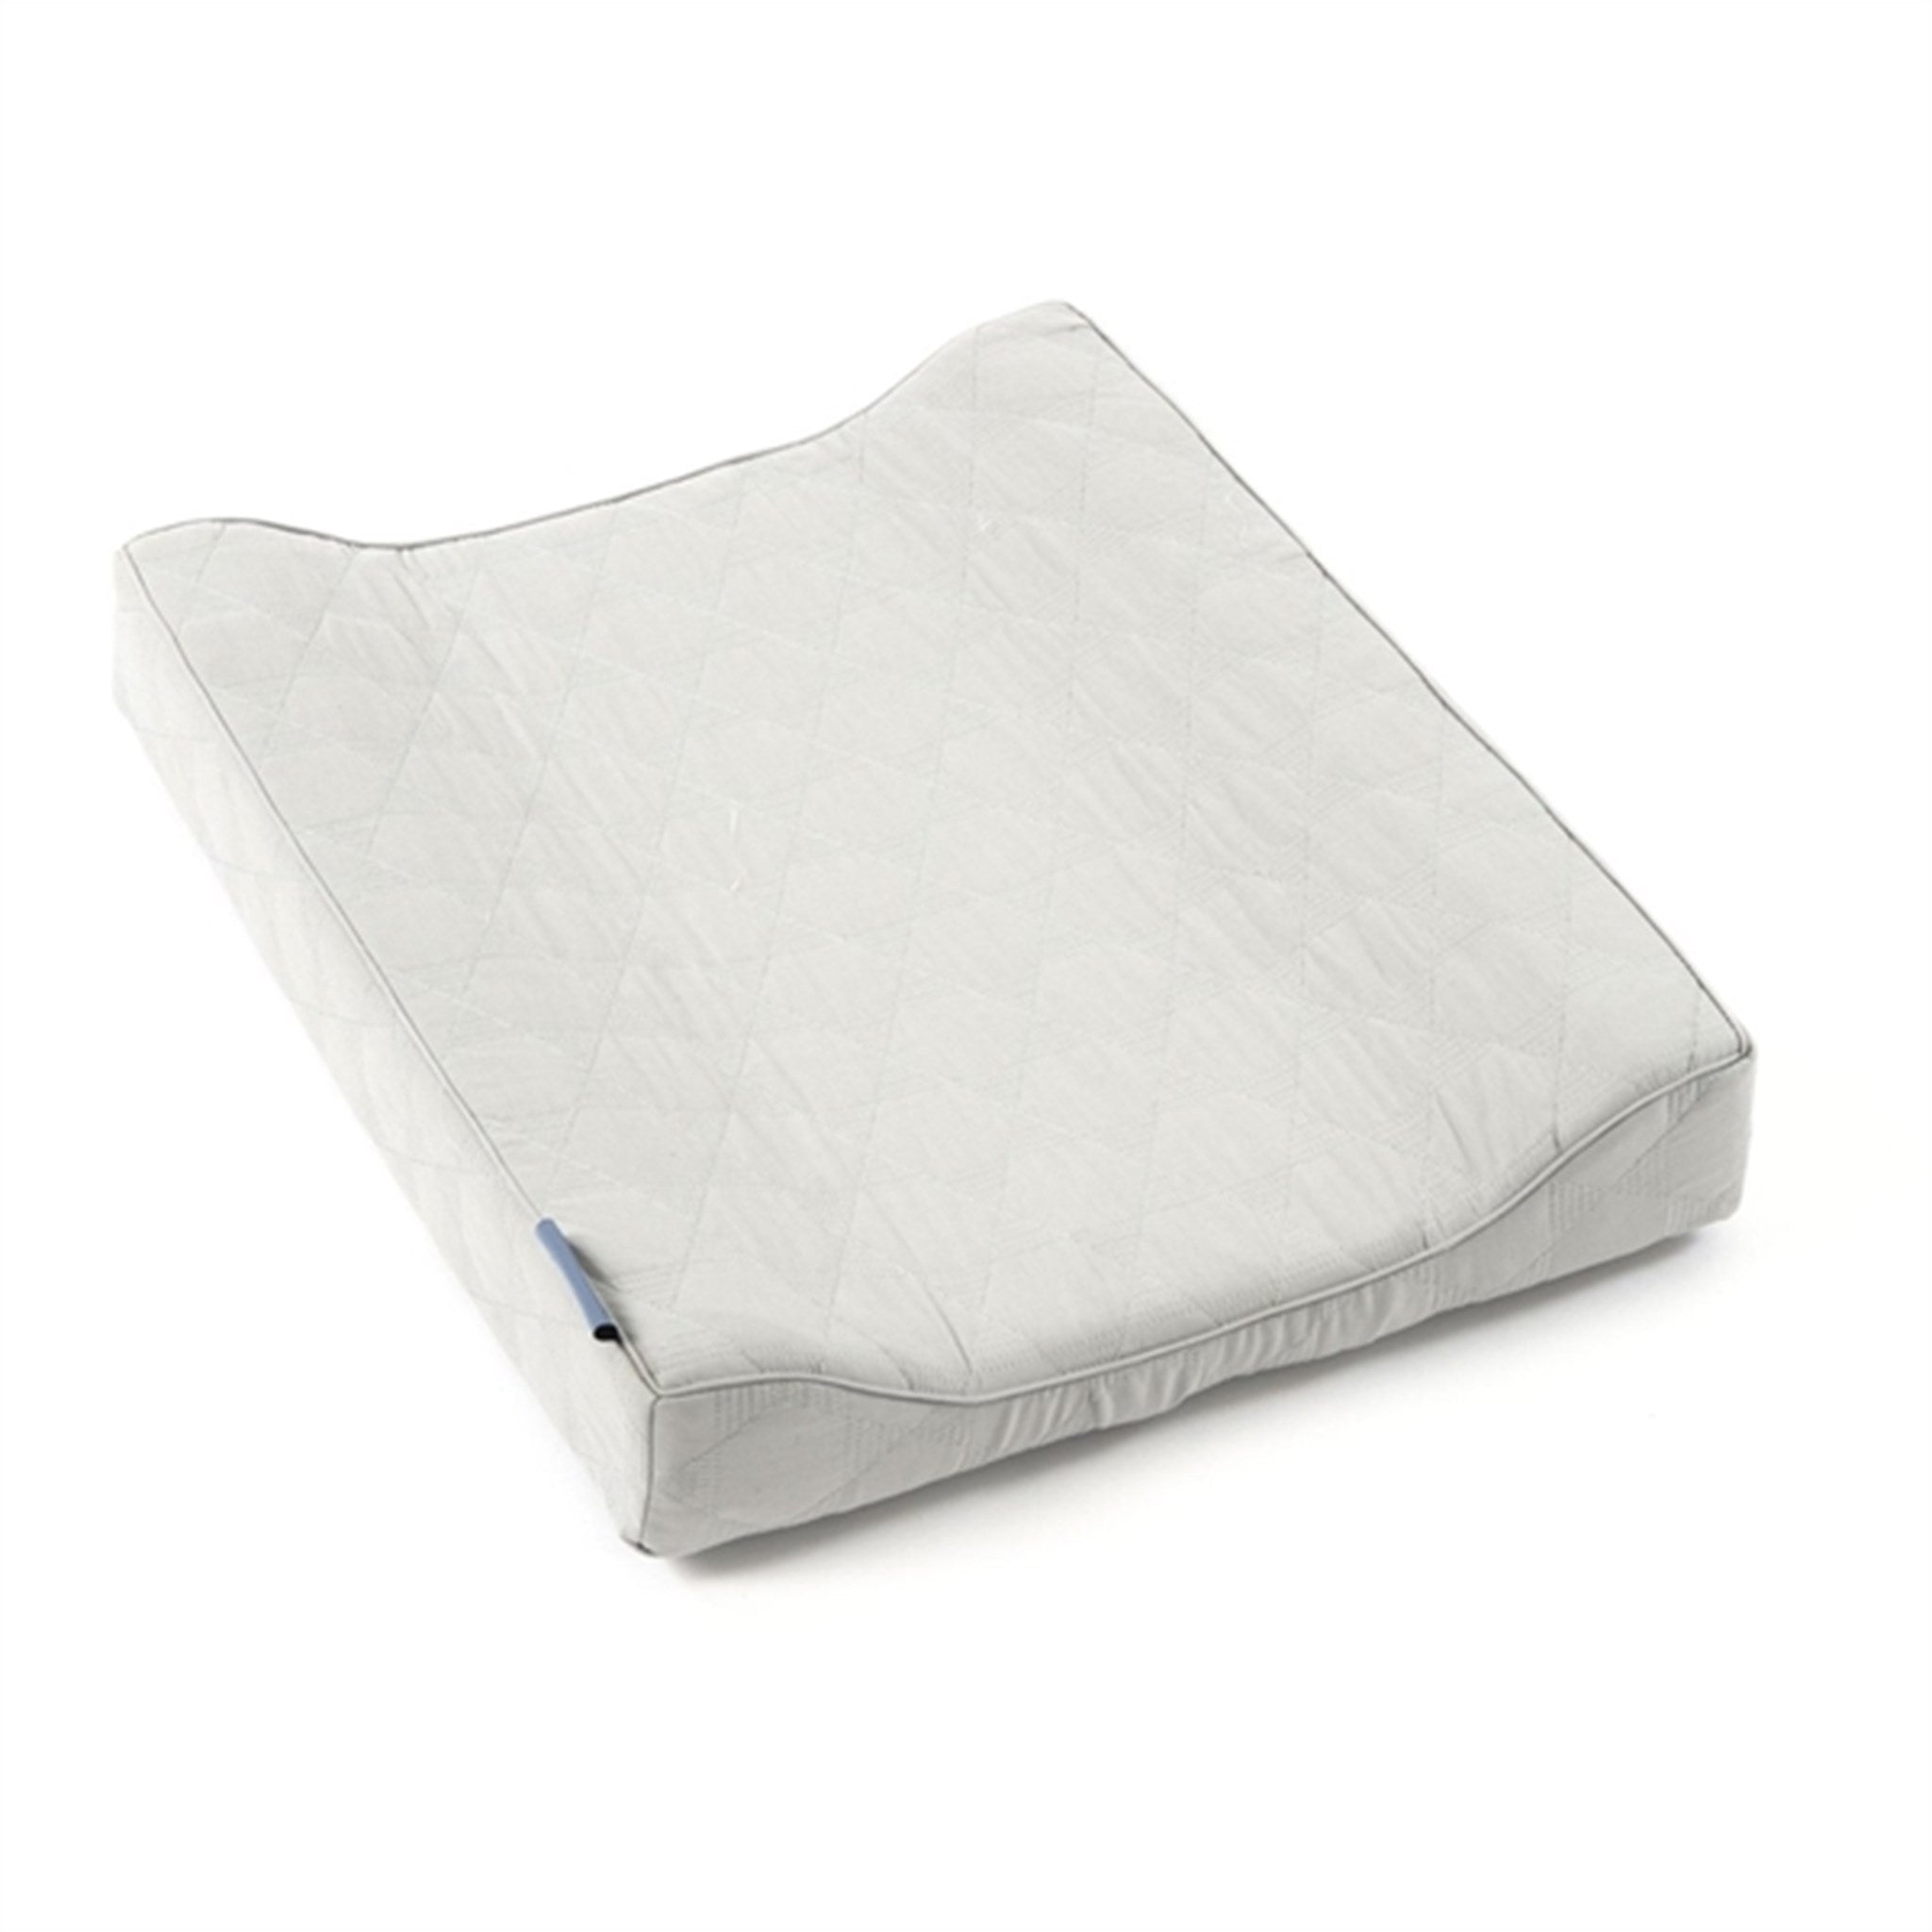 Smallstuff Quilted Changing Pad Soft Grey